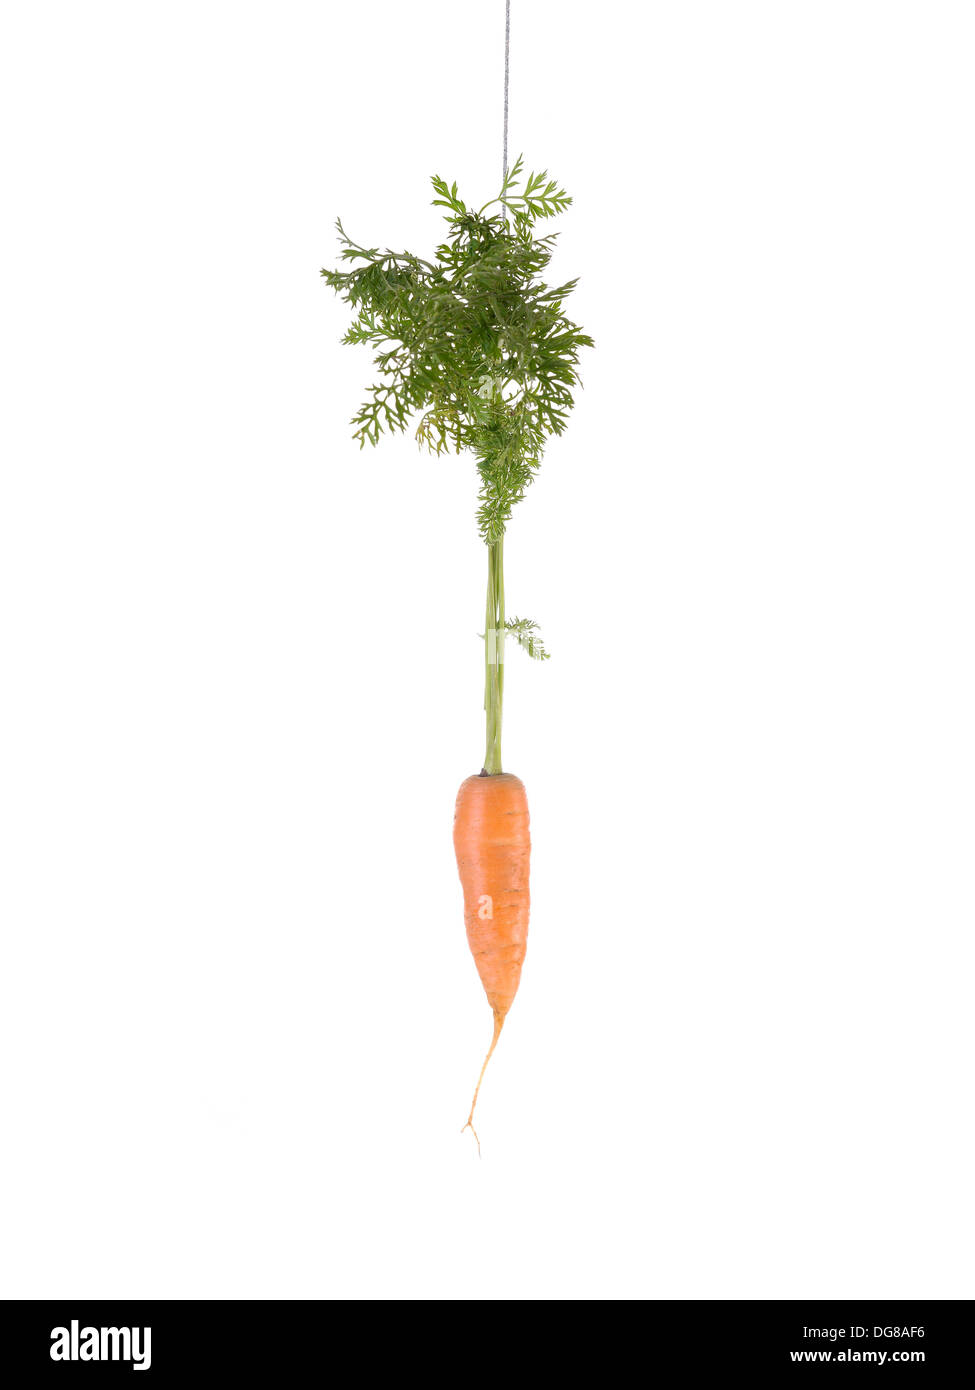 Carrot hanging on a string as Carrot and stick approach metaphor Stock Photo